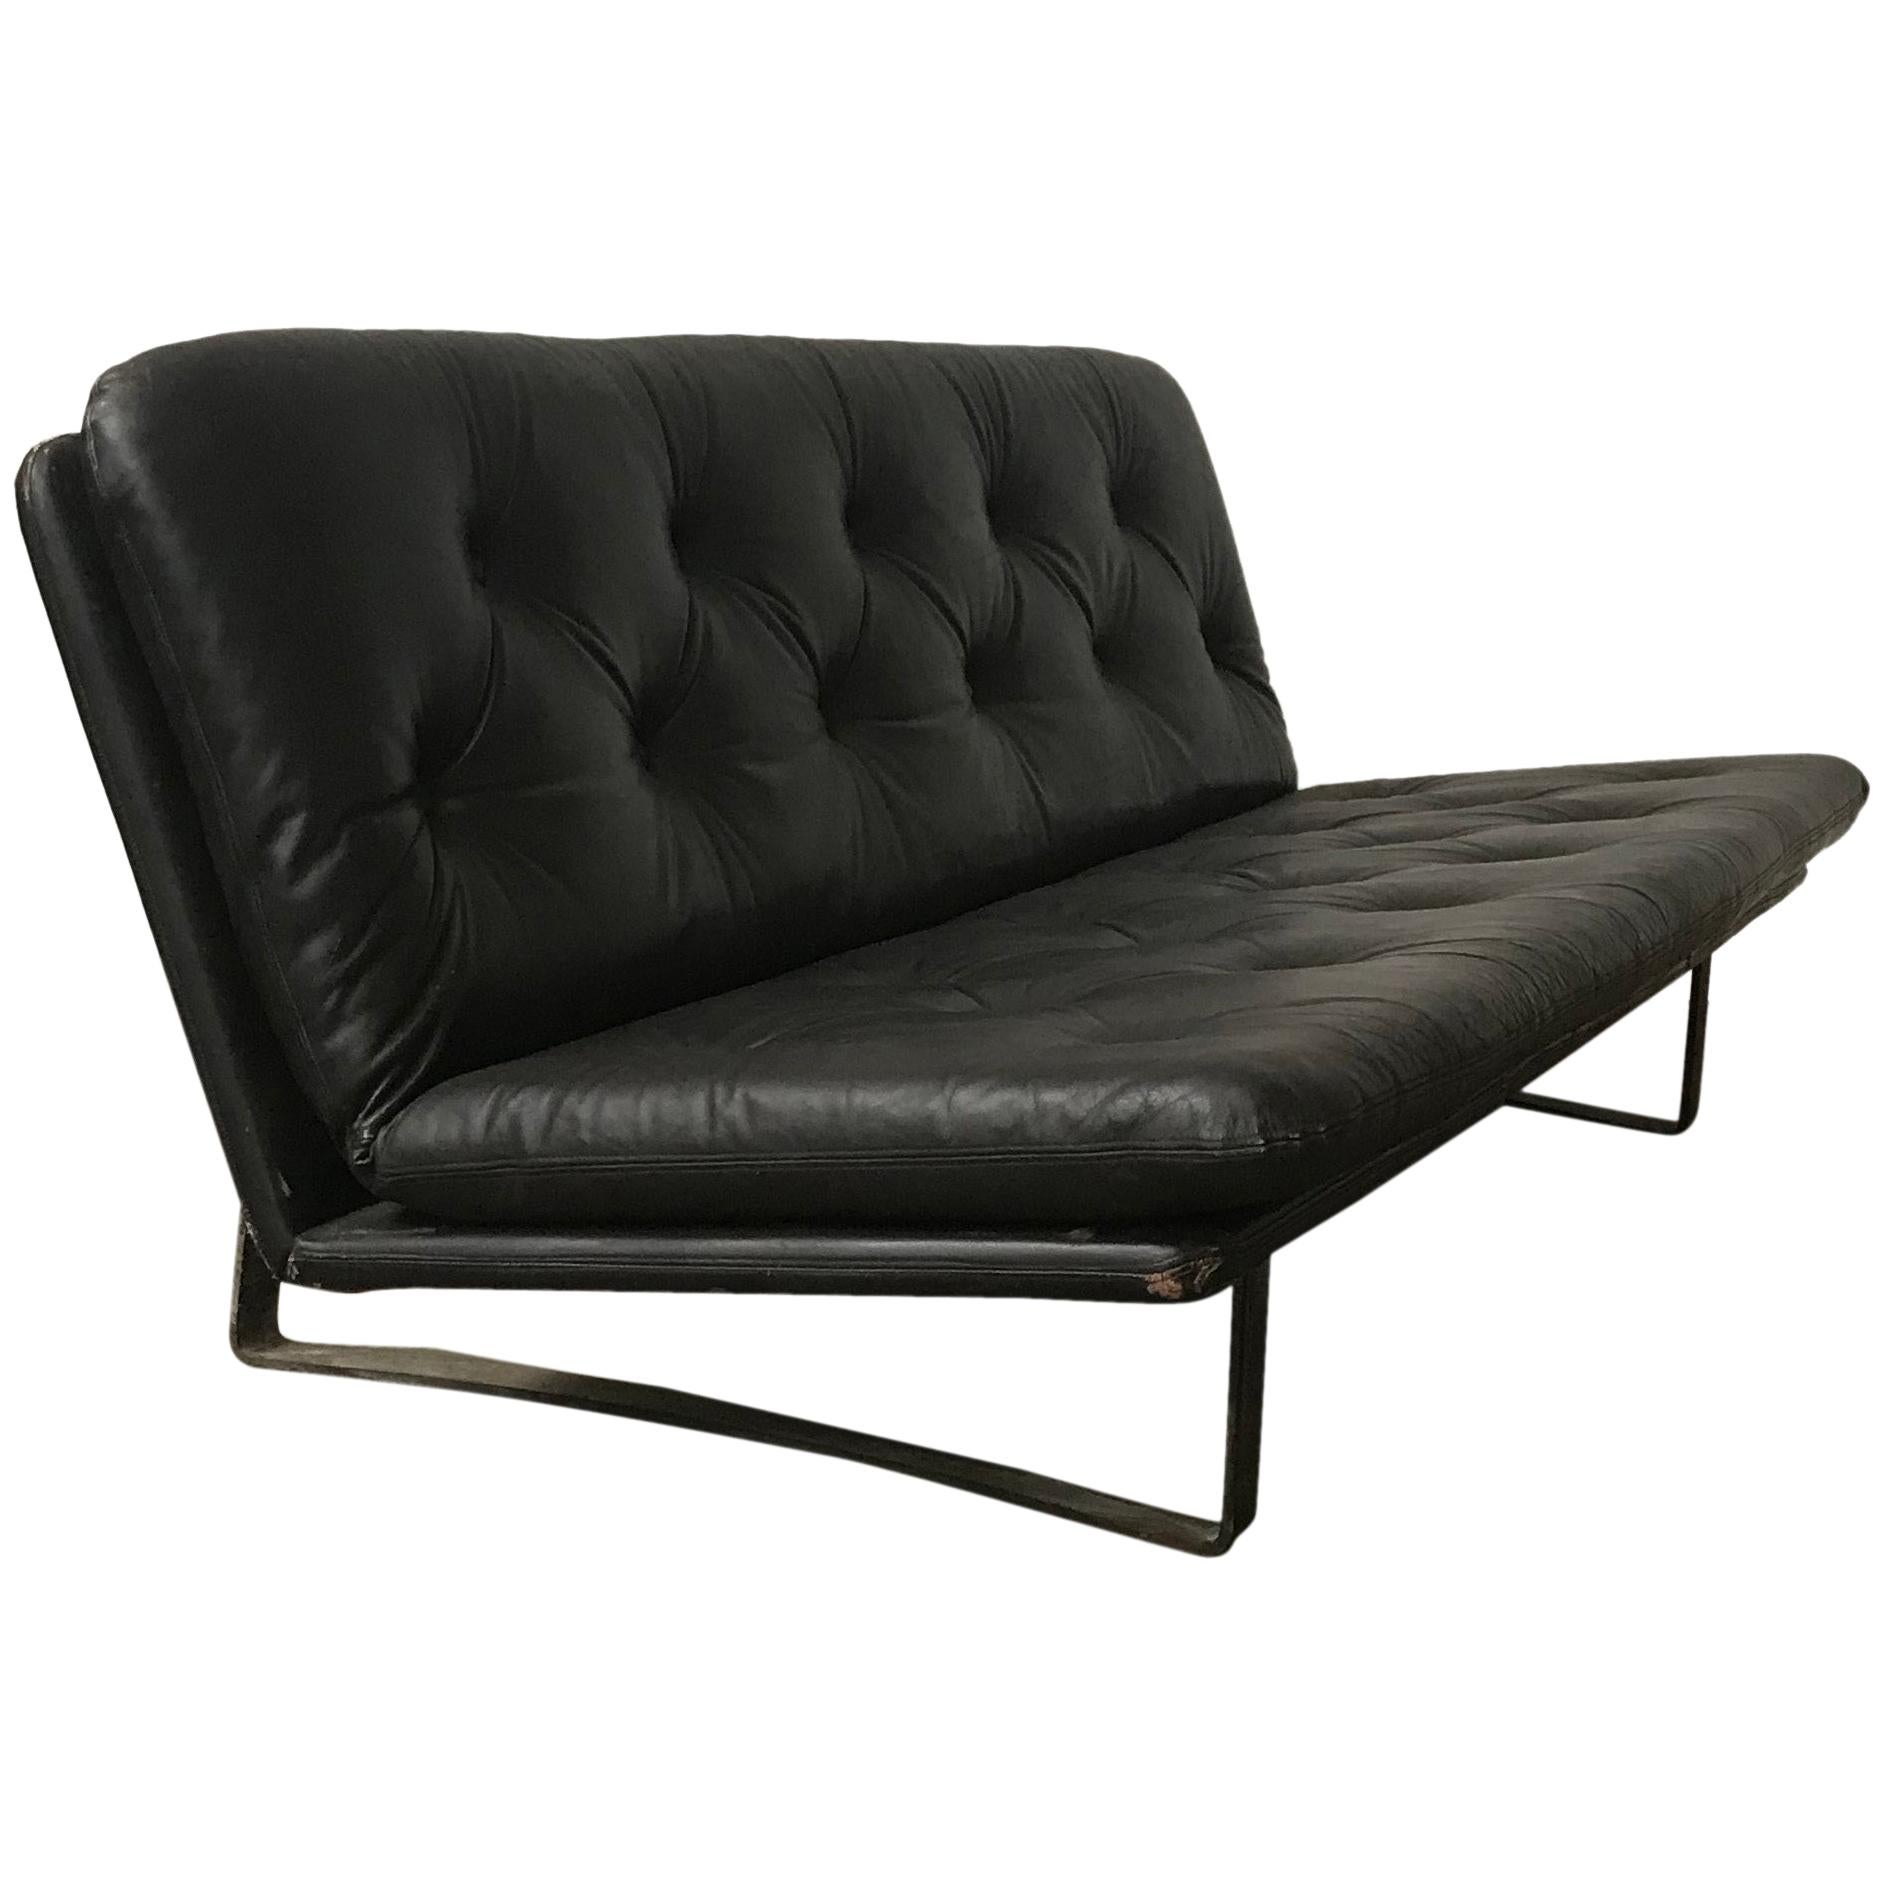 1968, Kho Liang Ie for Artifort, Black Base 3-Seat in Dark Brown Padded Leather